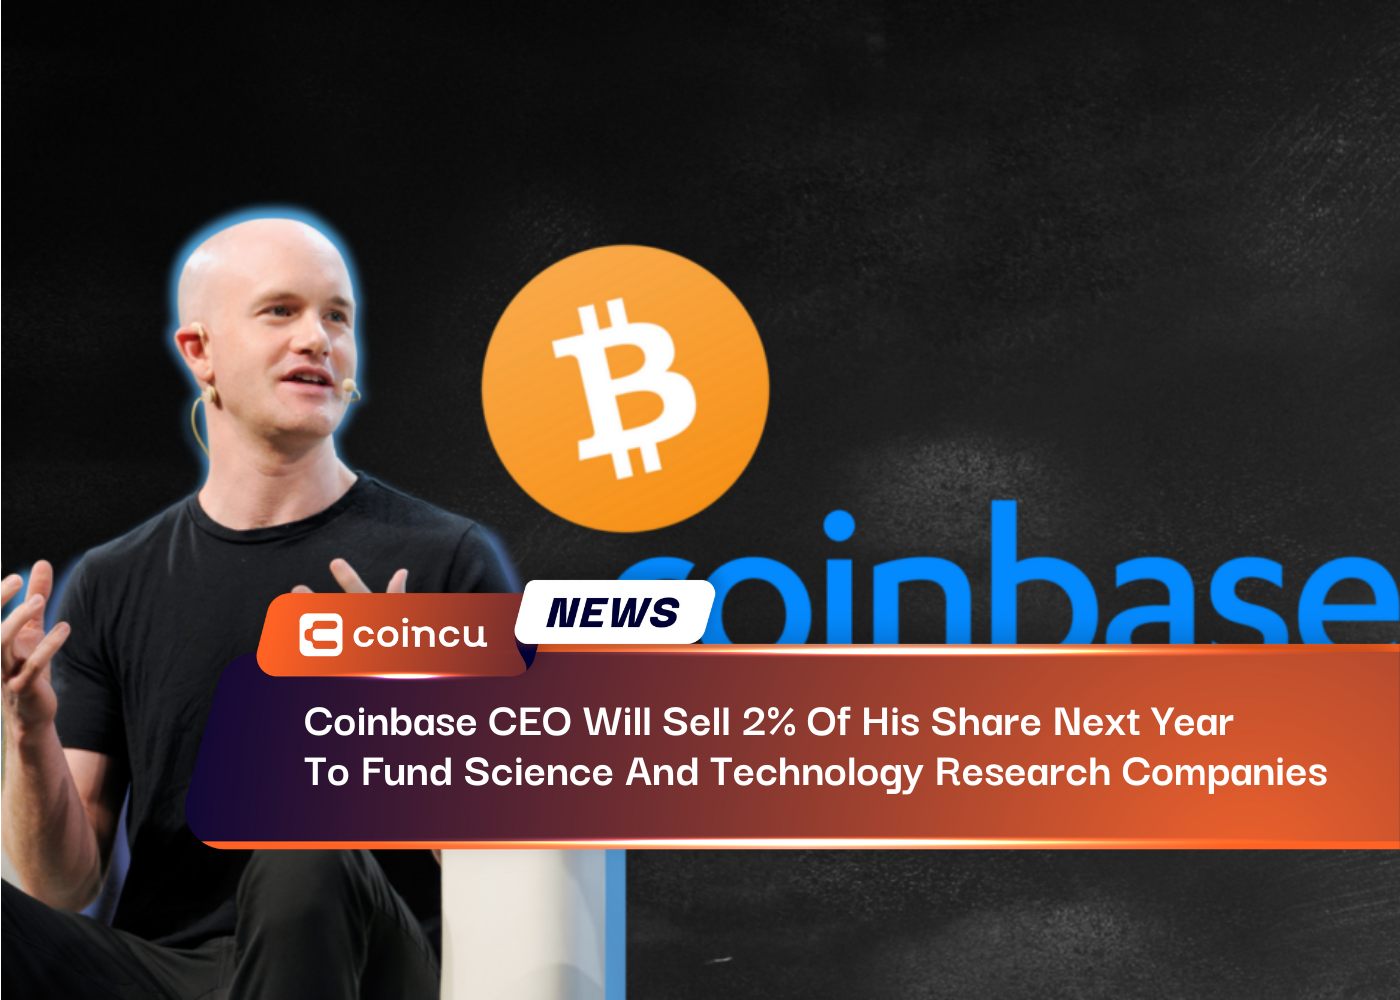 Coinbase CEO Will Sell 2% Of His Share Next Year To Fund Science And Technology Research Companies